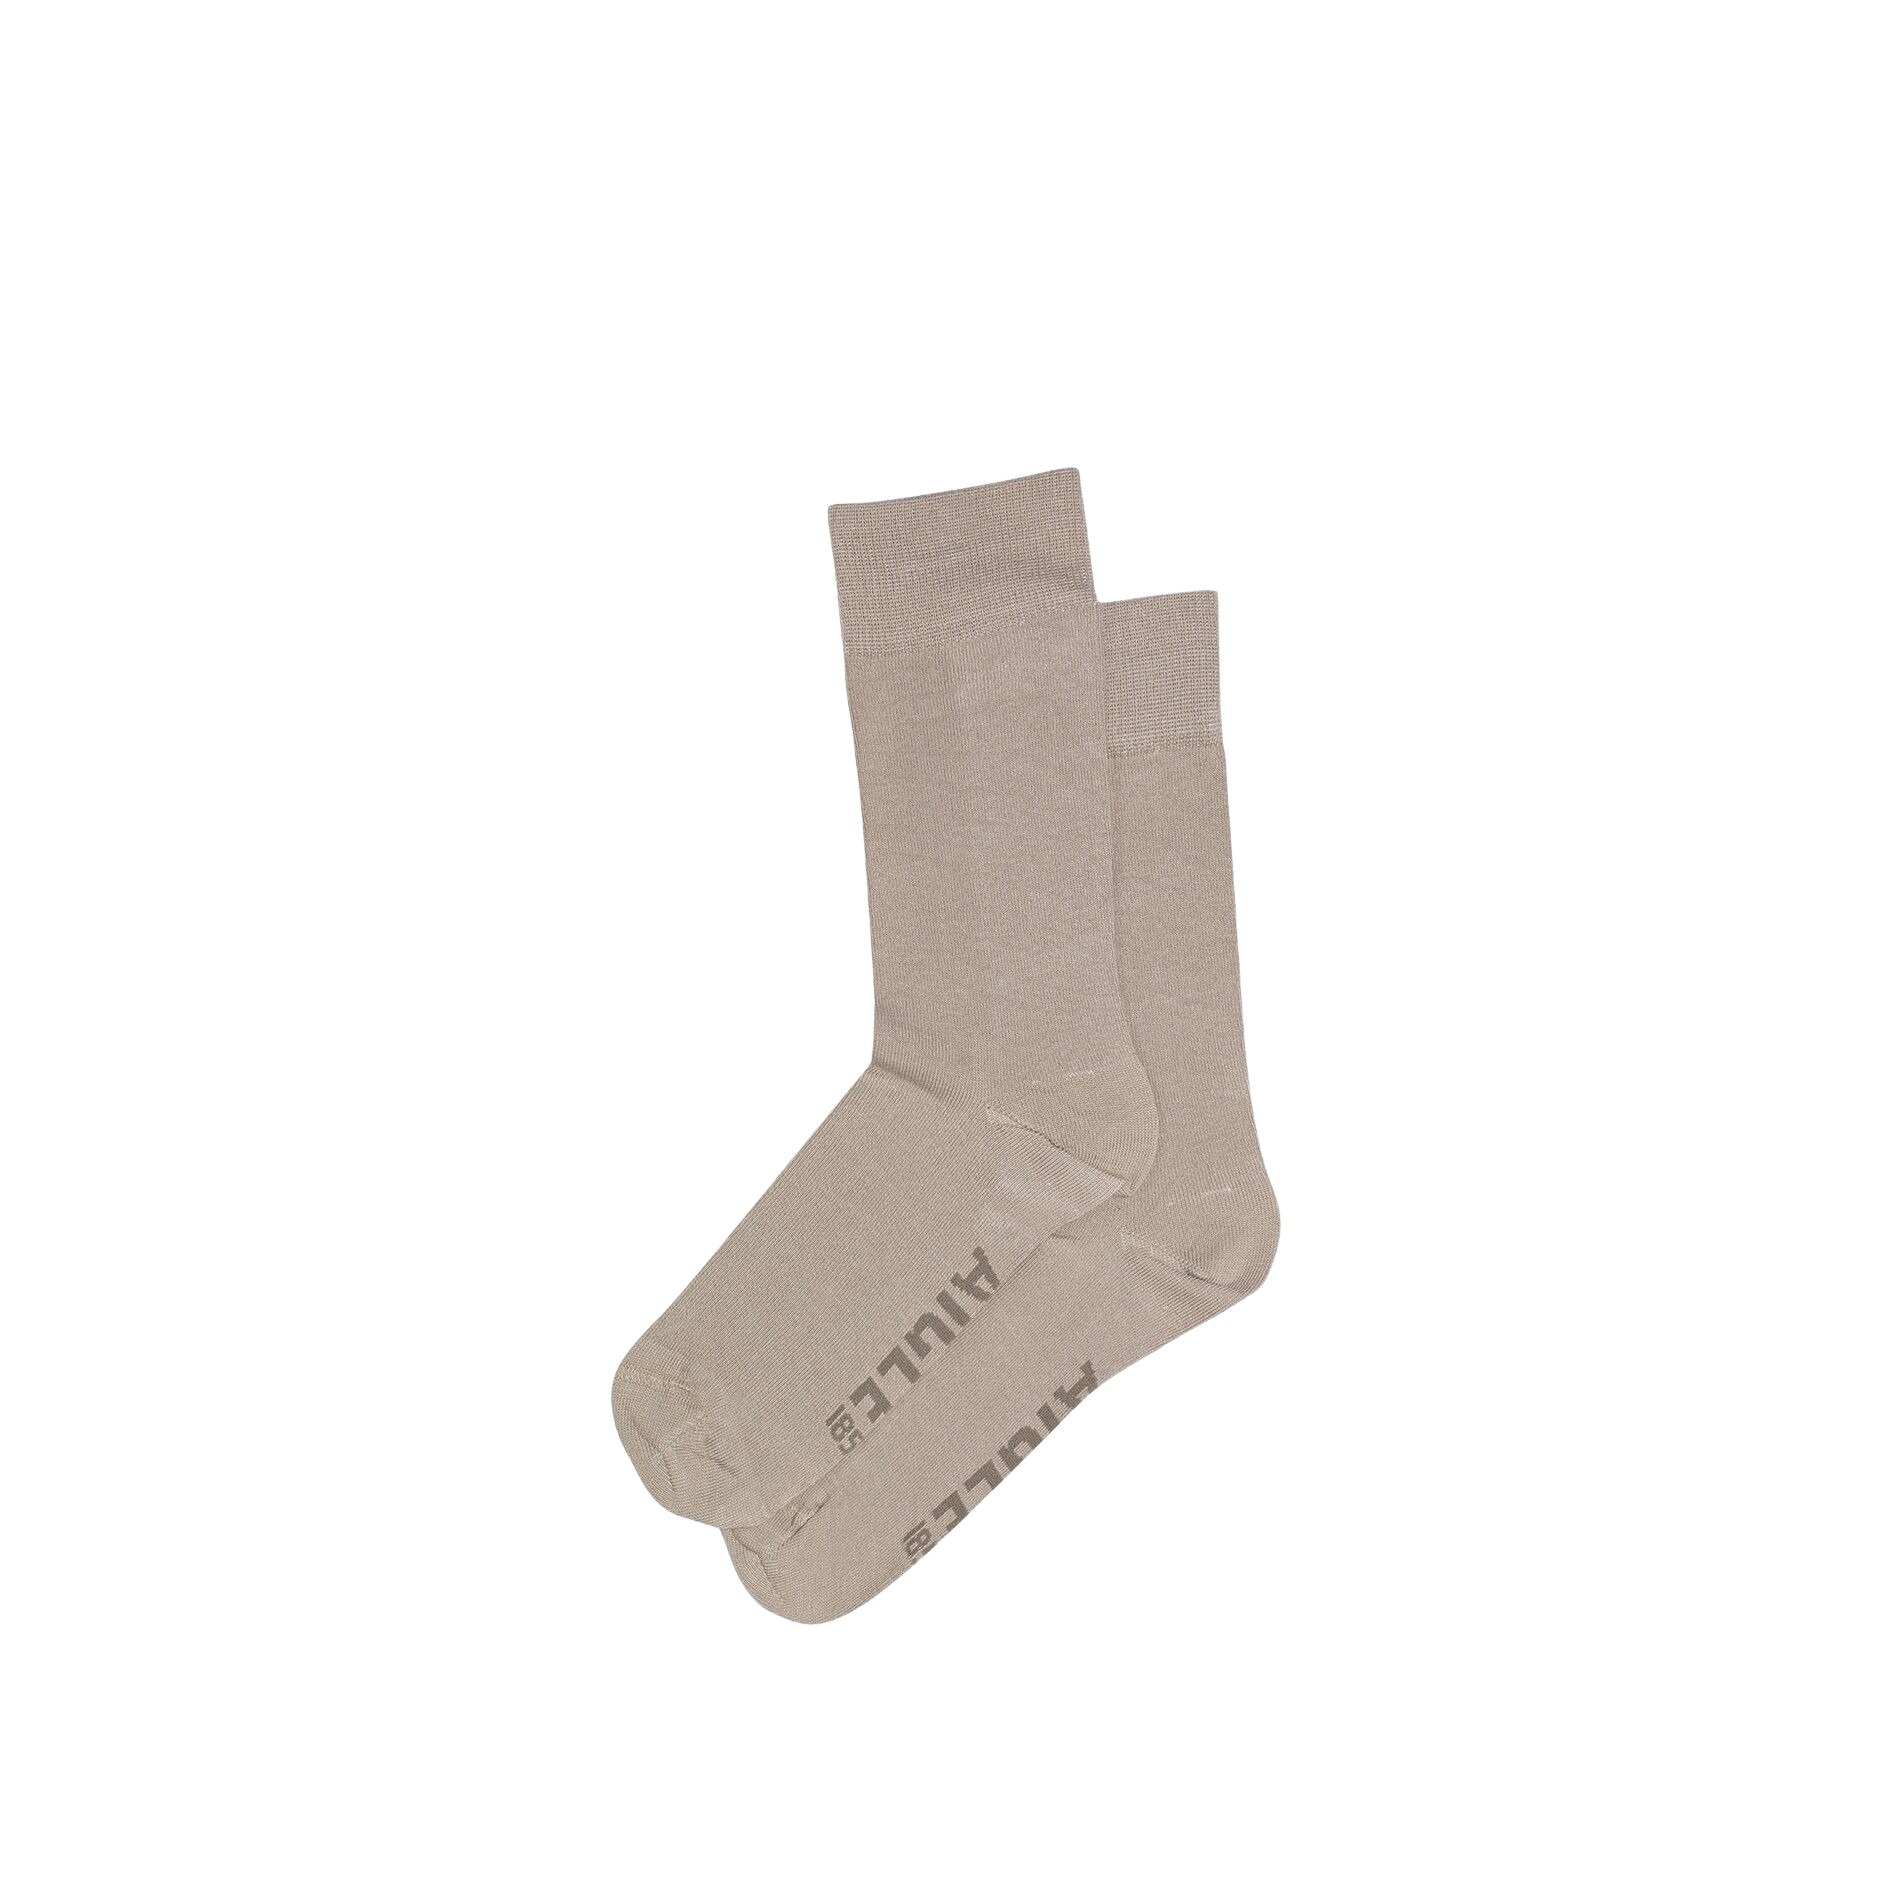 chaussettes unies en coton aigle made in france